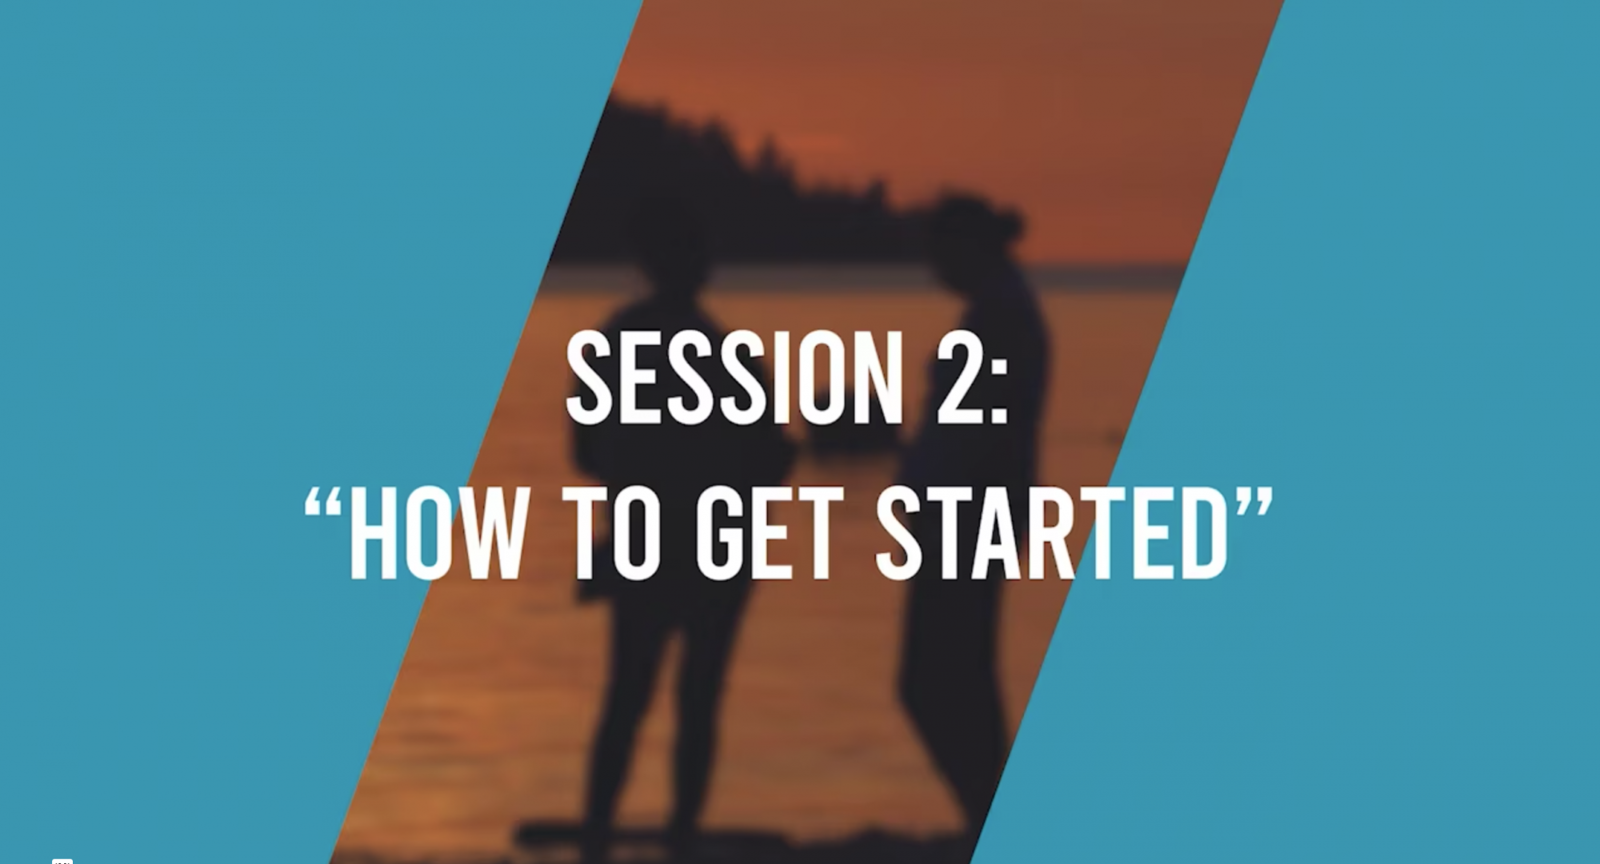 Session 2: How to Get Started